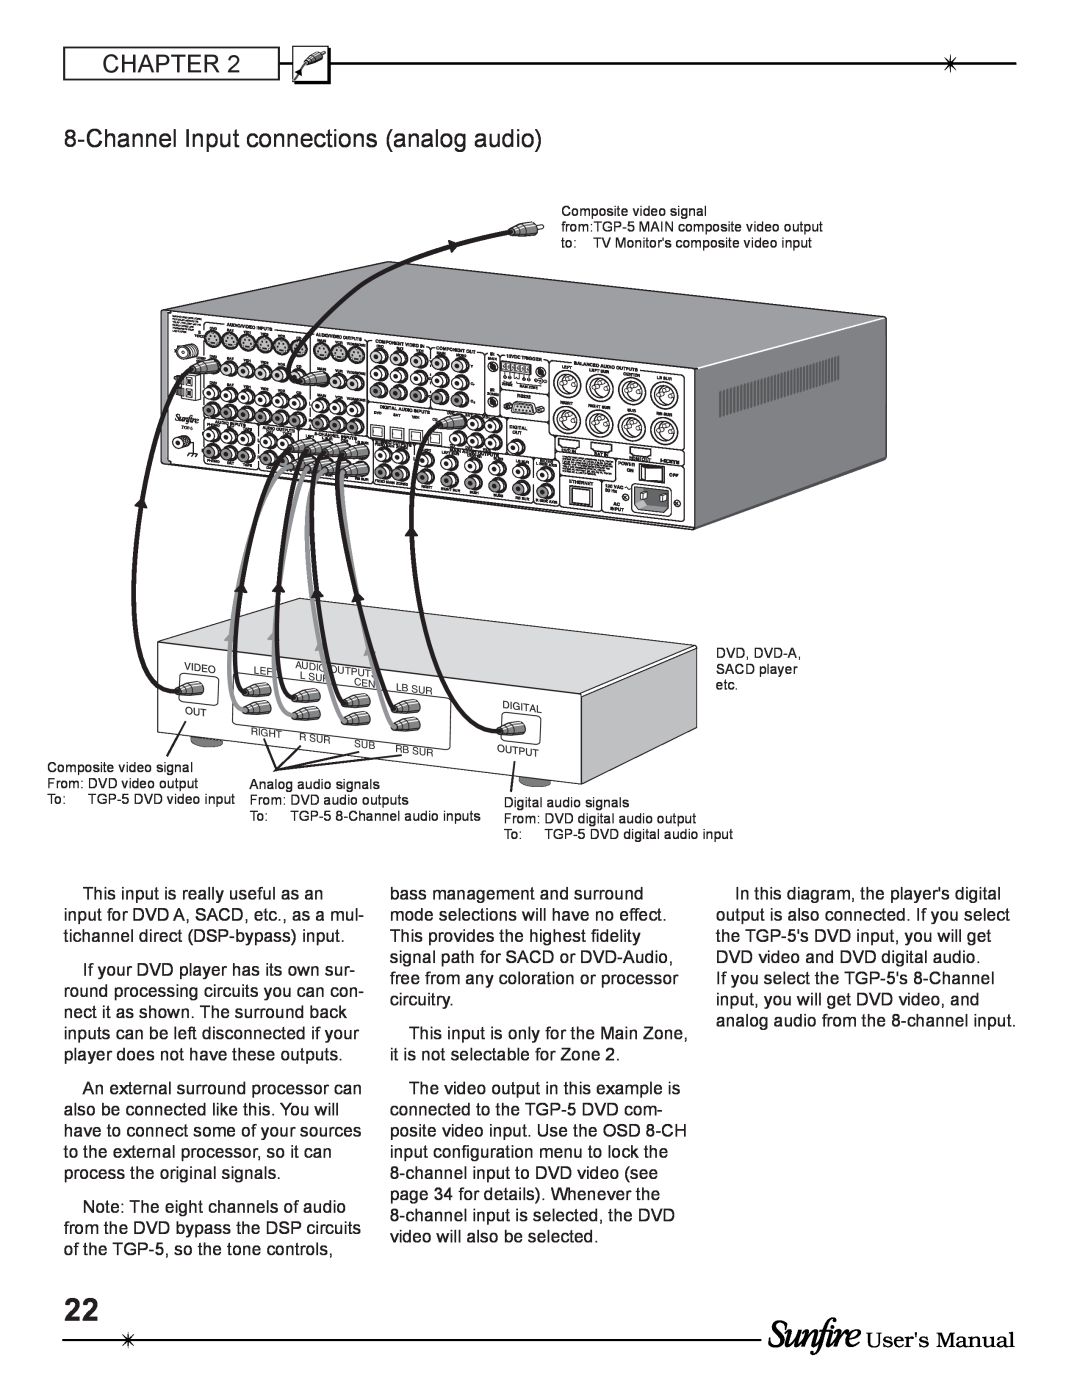 Sunfire TGP-5(E) manual ChannelInput connections analog audio, Users Manual 